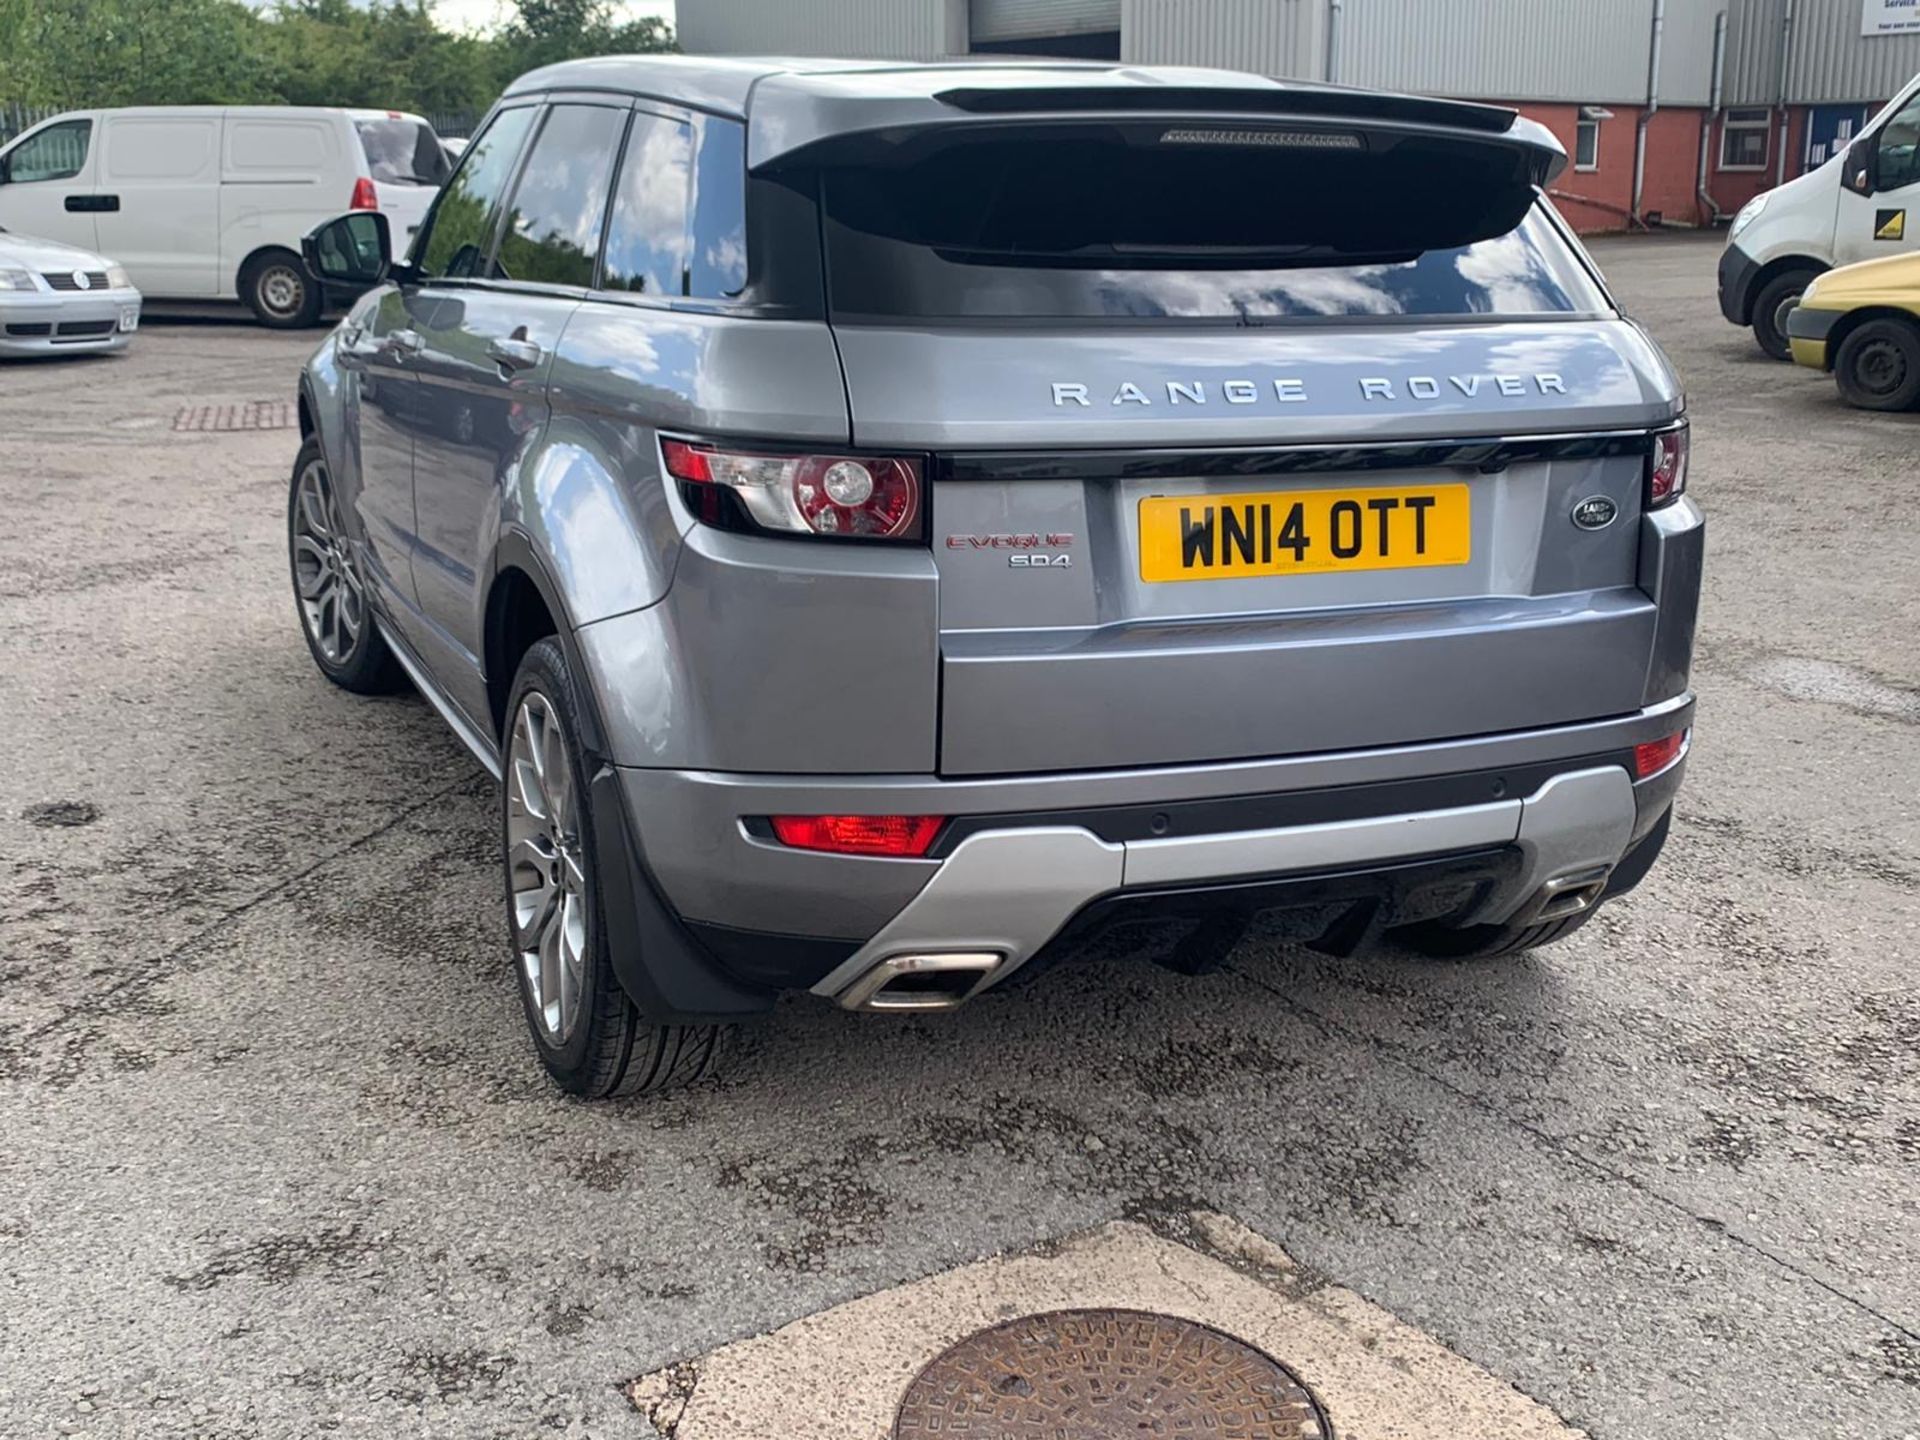 2014/14 REG LAND ROVER RANGE ROVER EVOQUE DYNAMIC S 2.2 DIESEL GREY, SHOWING 2 FORMER KEEPERS - Image 5 of 13